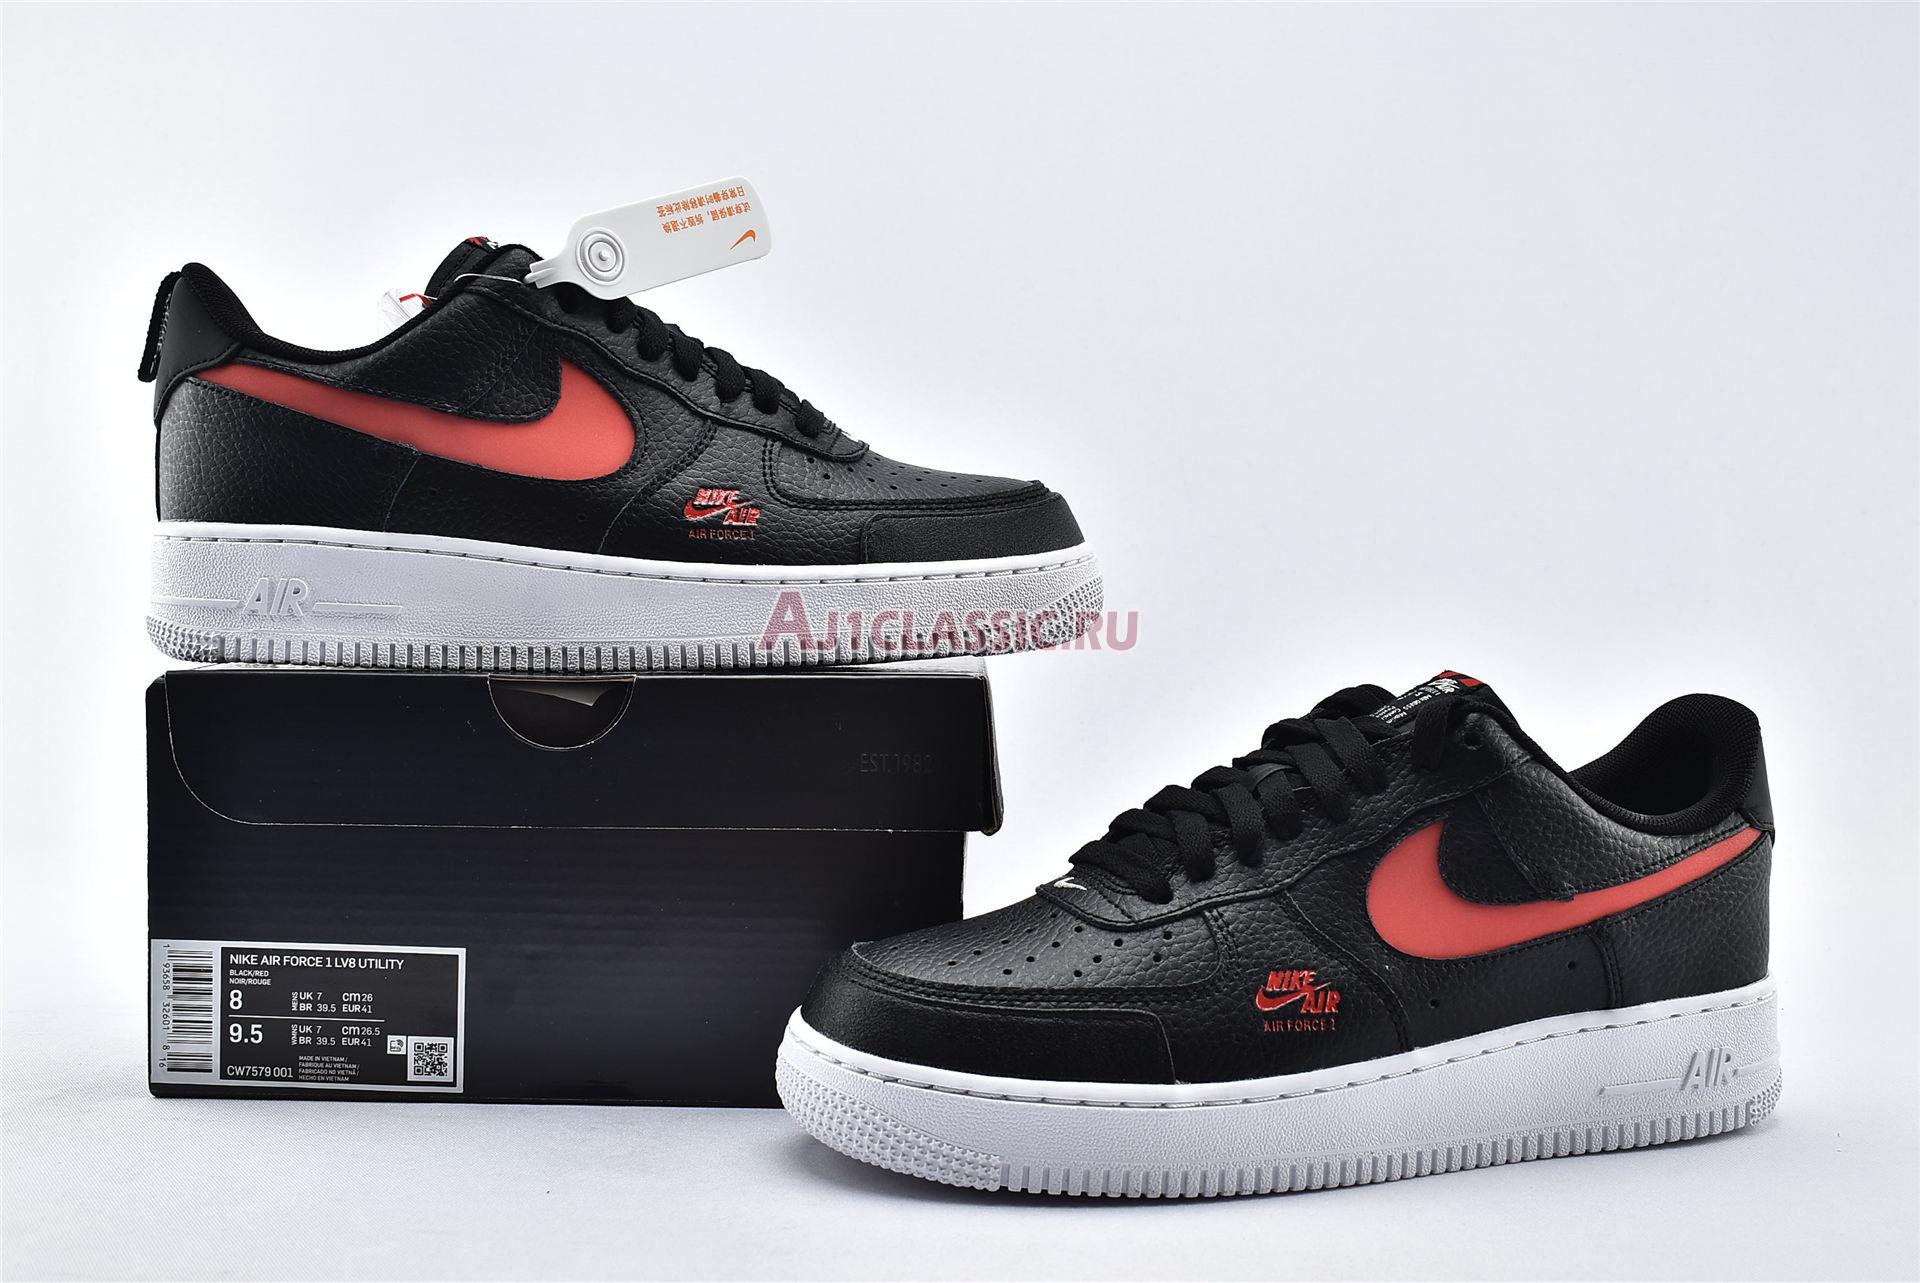 Nike Air Force 1 Low LV8 Utility Bred CW7579-001 Black/University Red-White Sneakers